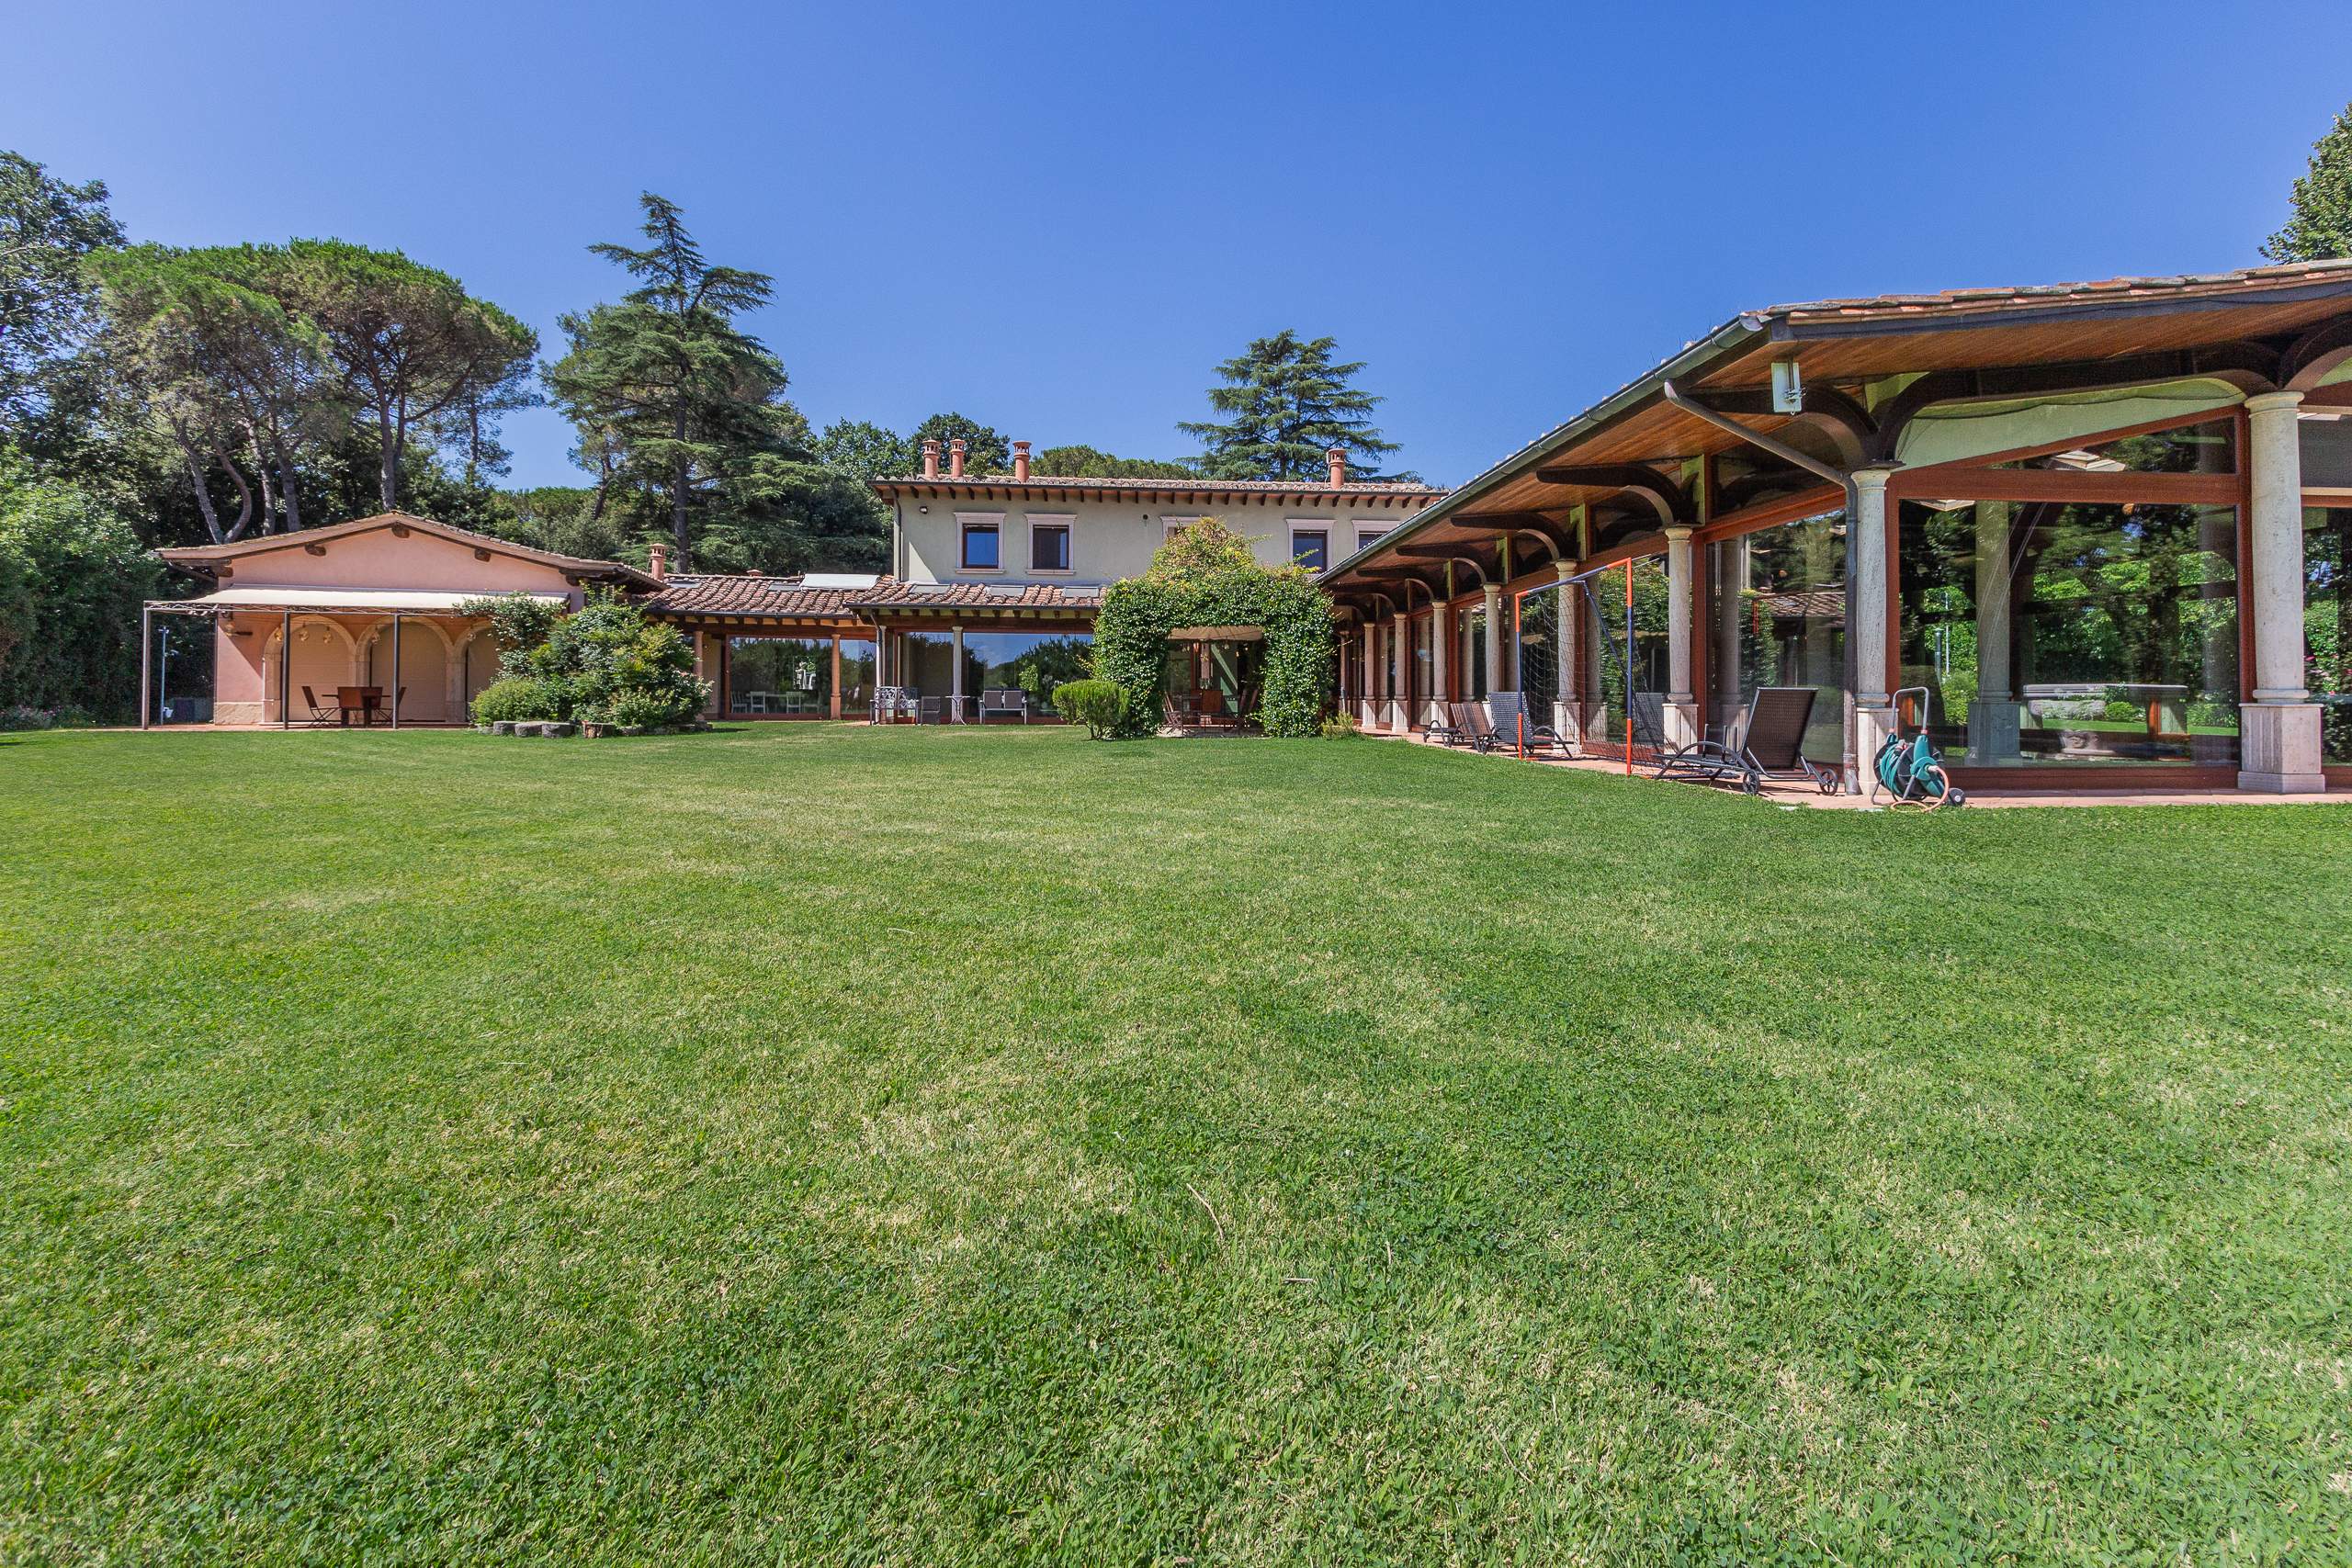 Italian villa surrounded by a large garden